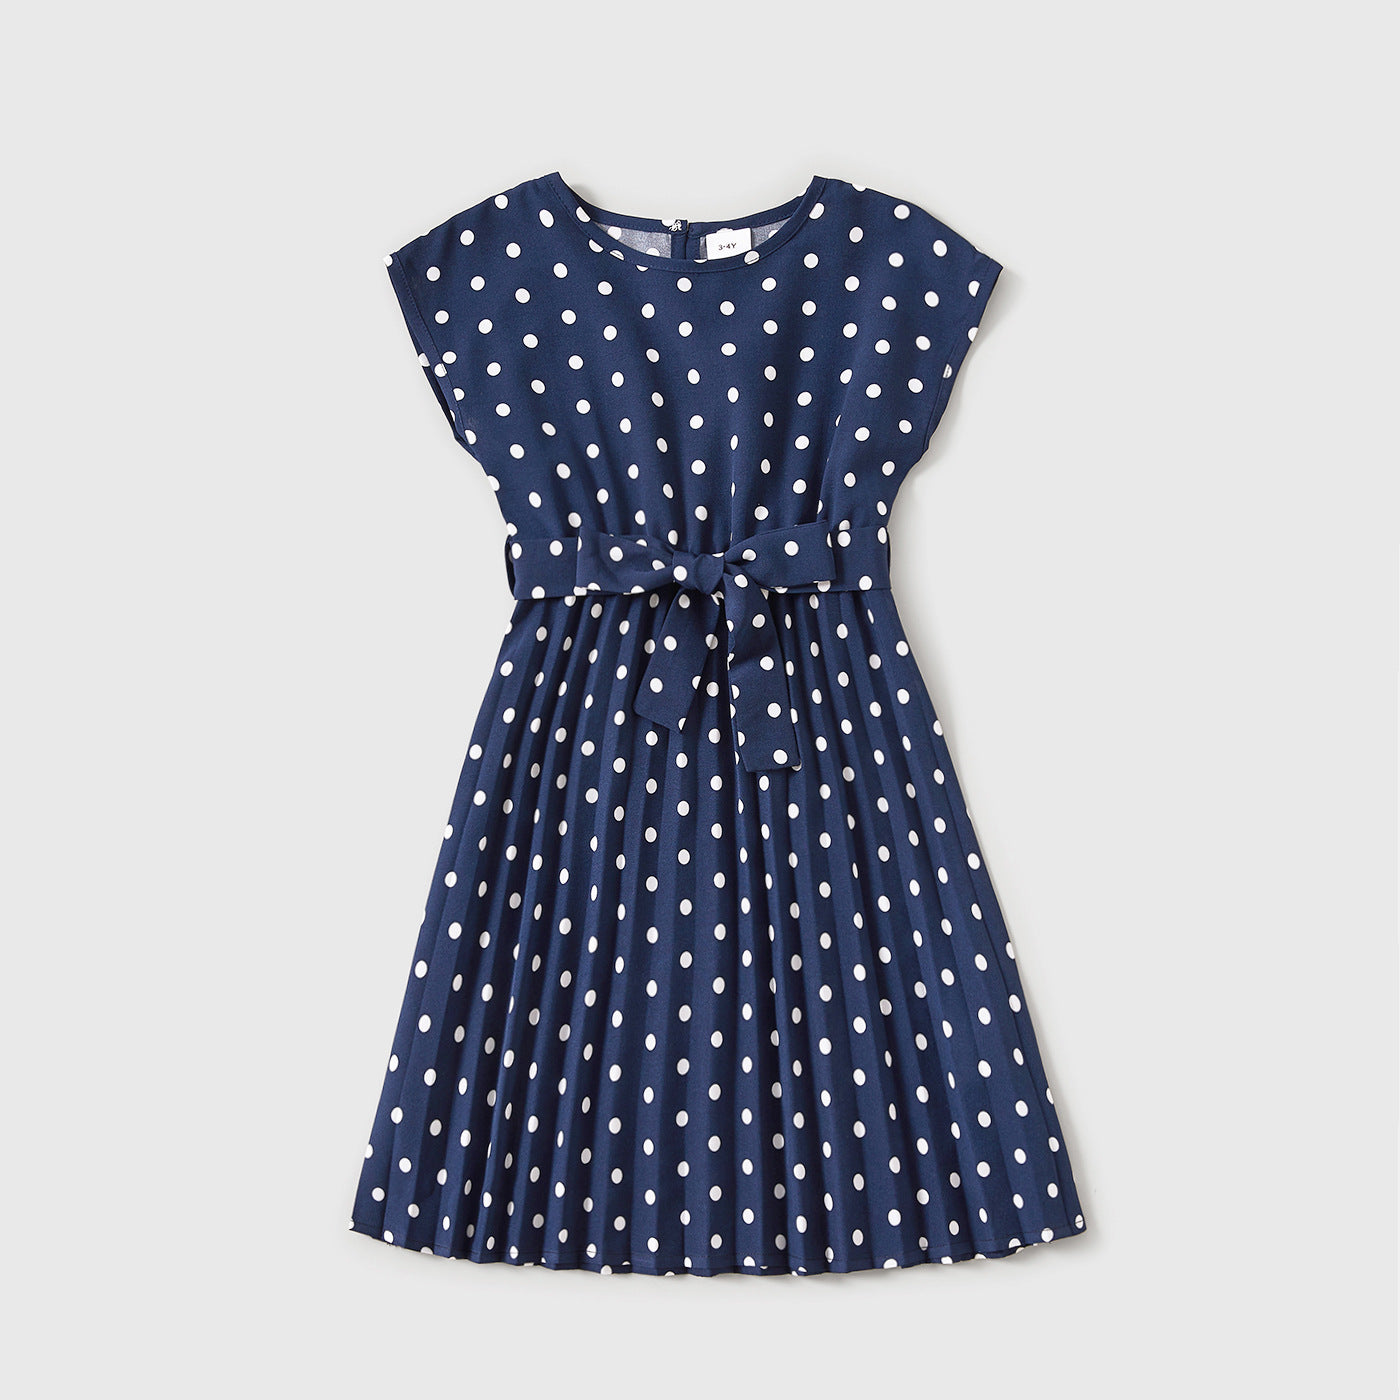 Allover Polka Dots Blue Sleeveless Dress for Mom and Me